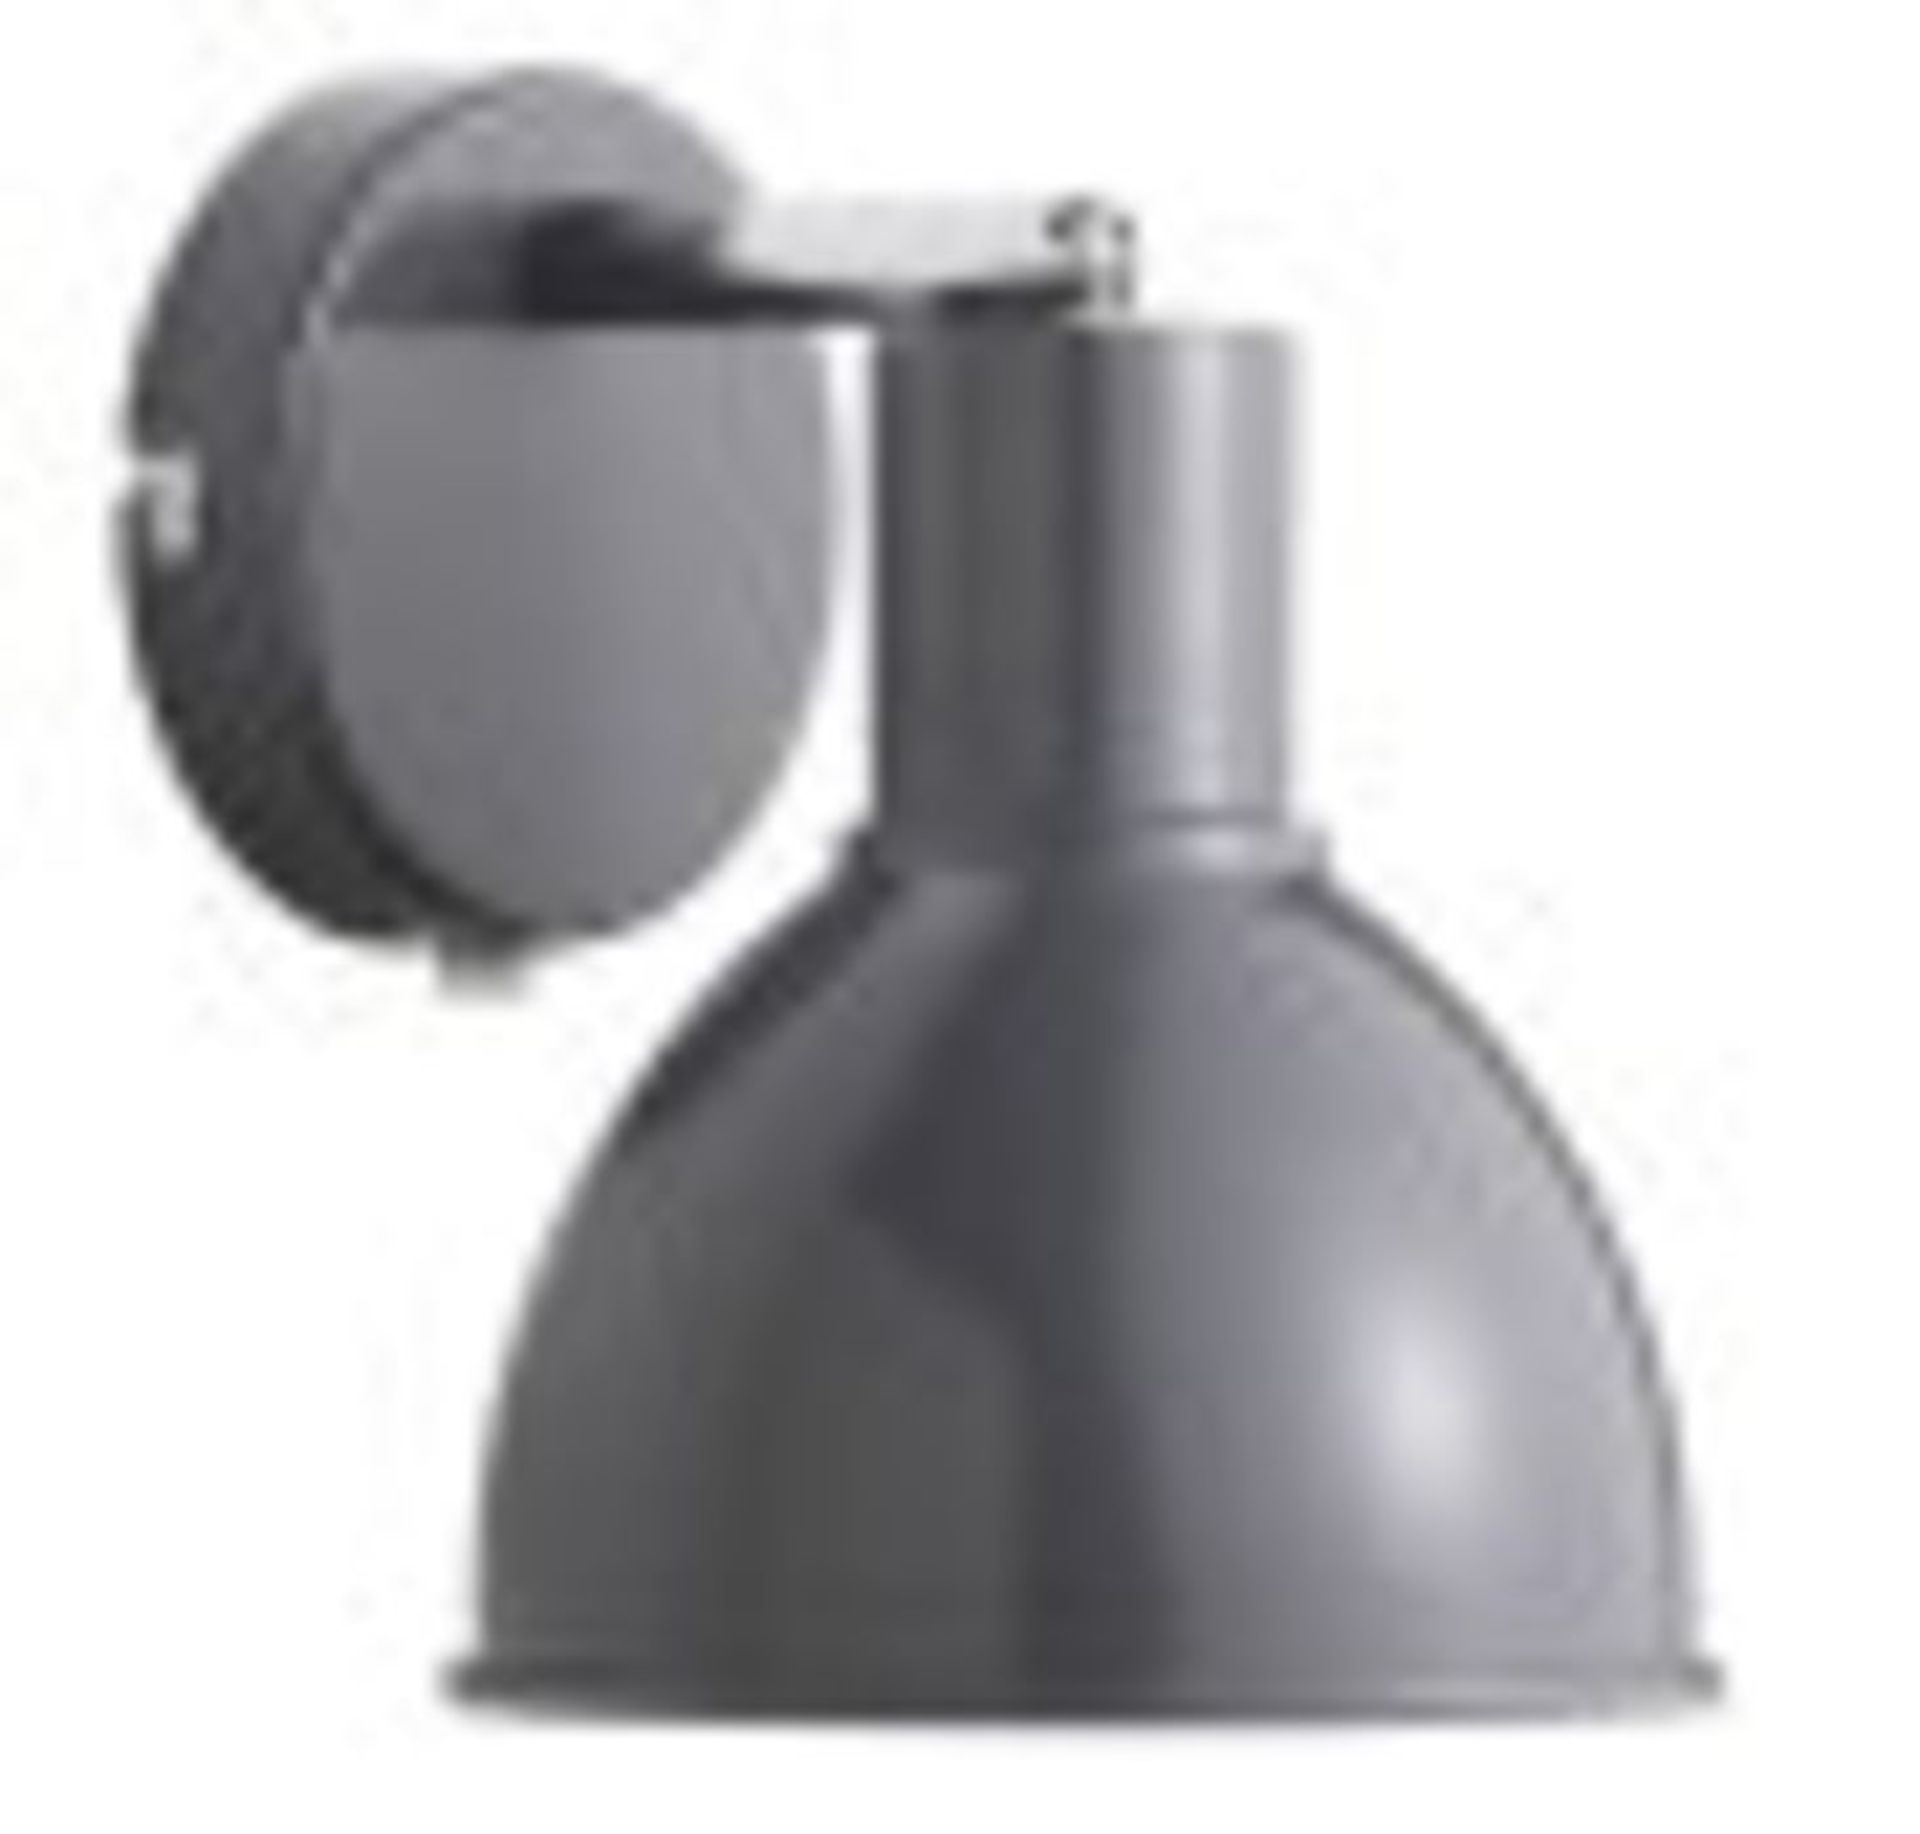 Nordlux Pop 1-Light Armed Sconce (ANTHRACITE) RRP - £34.99 (NDX3026 - 7411/31) 2F